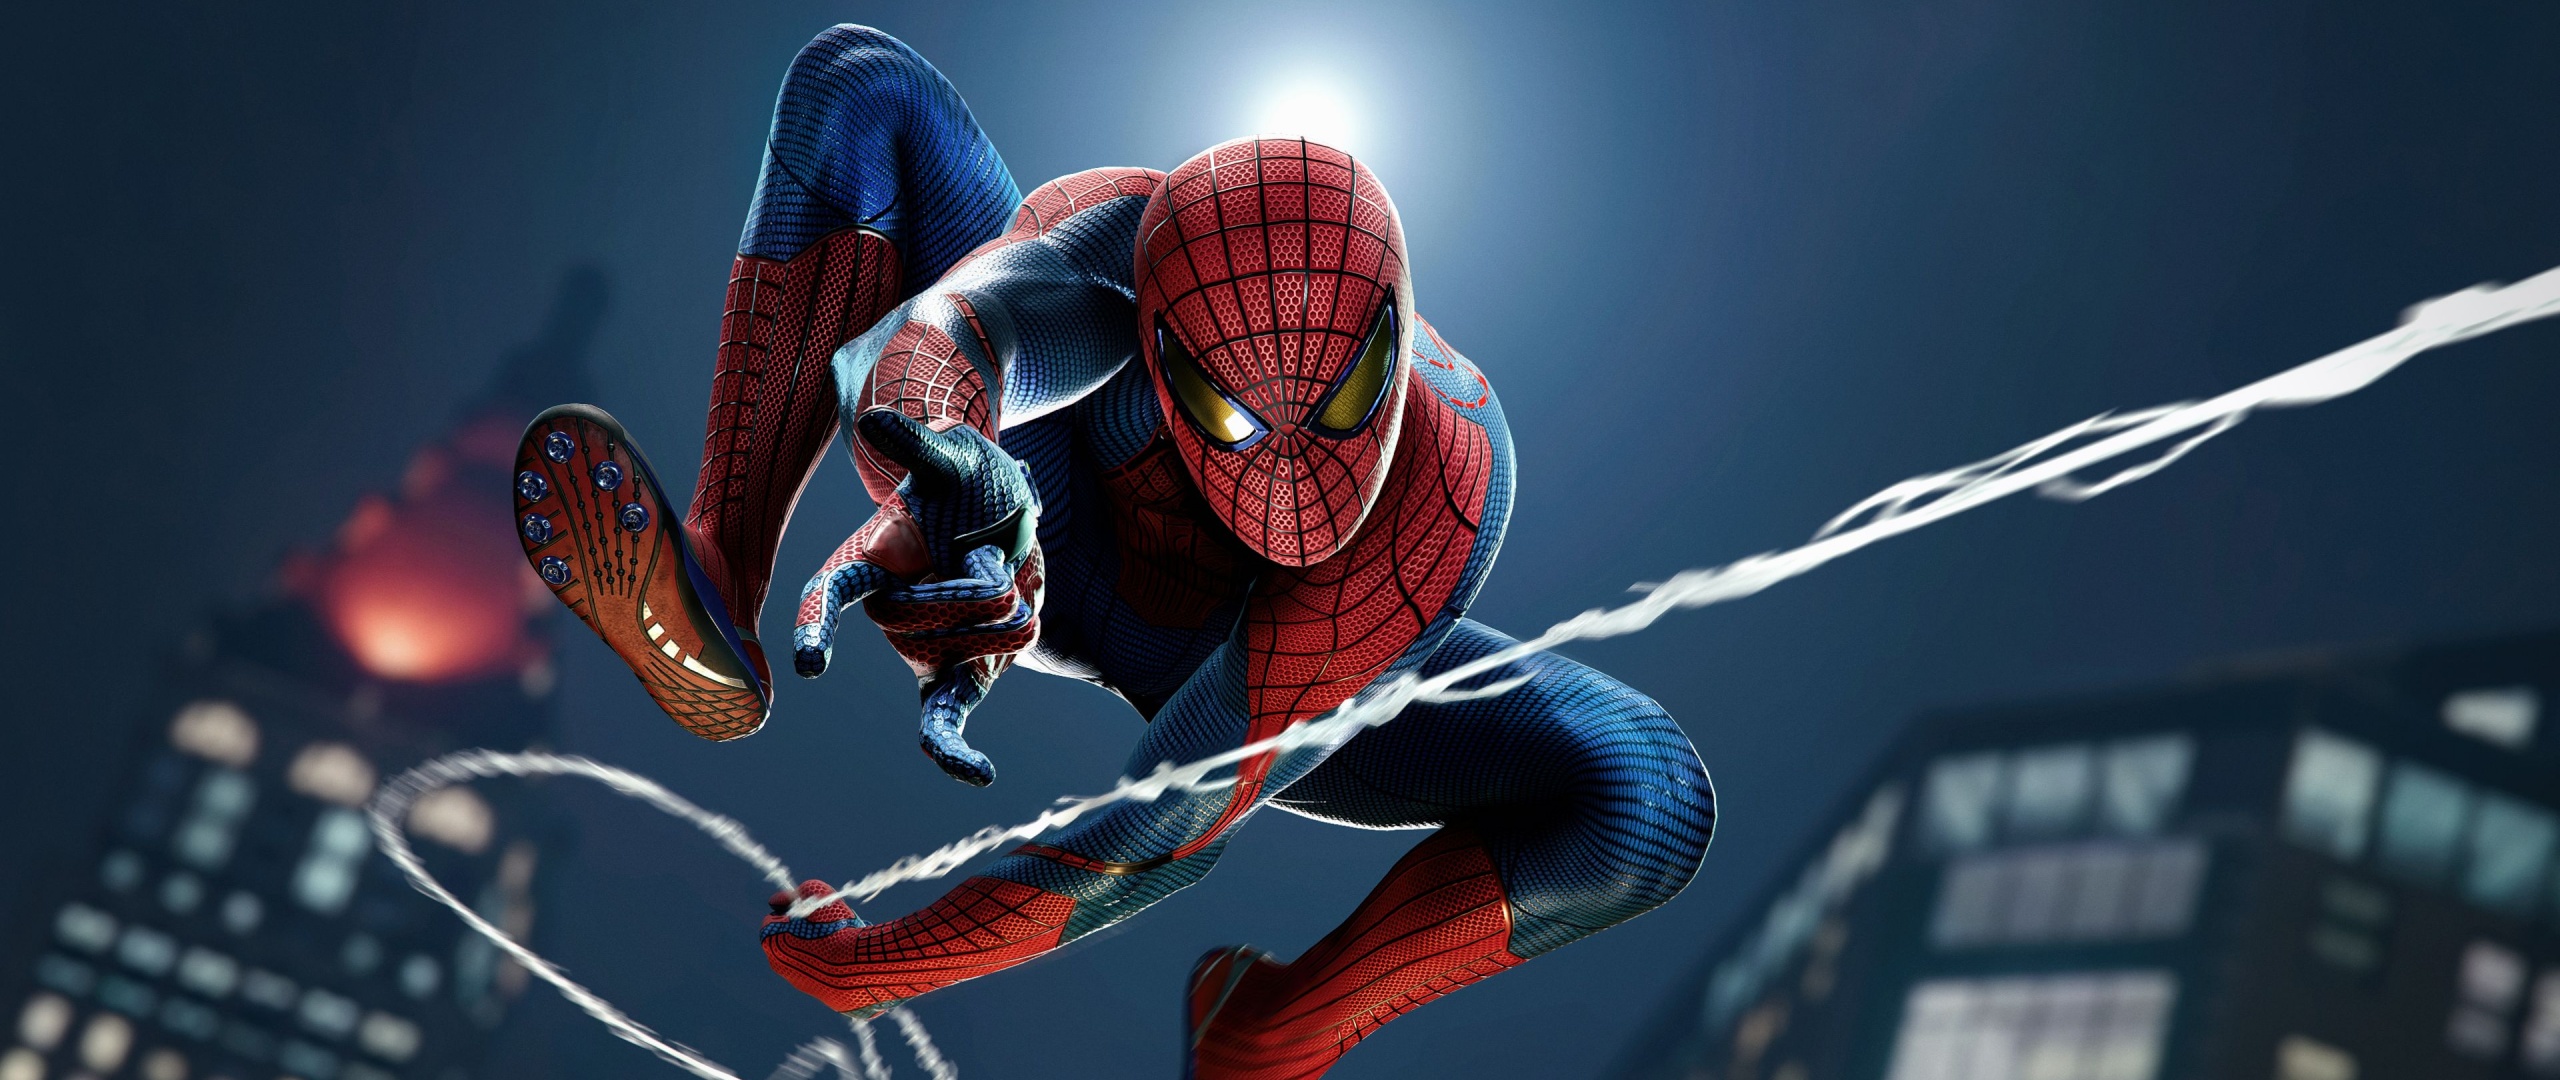 SpiderMan Thunder In No Way Home 4K Ultra HD Mobile Wallpaper